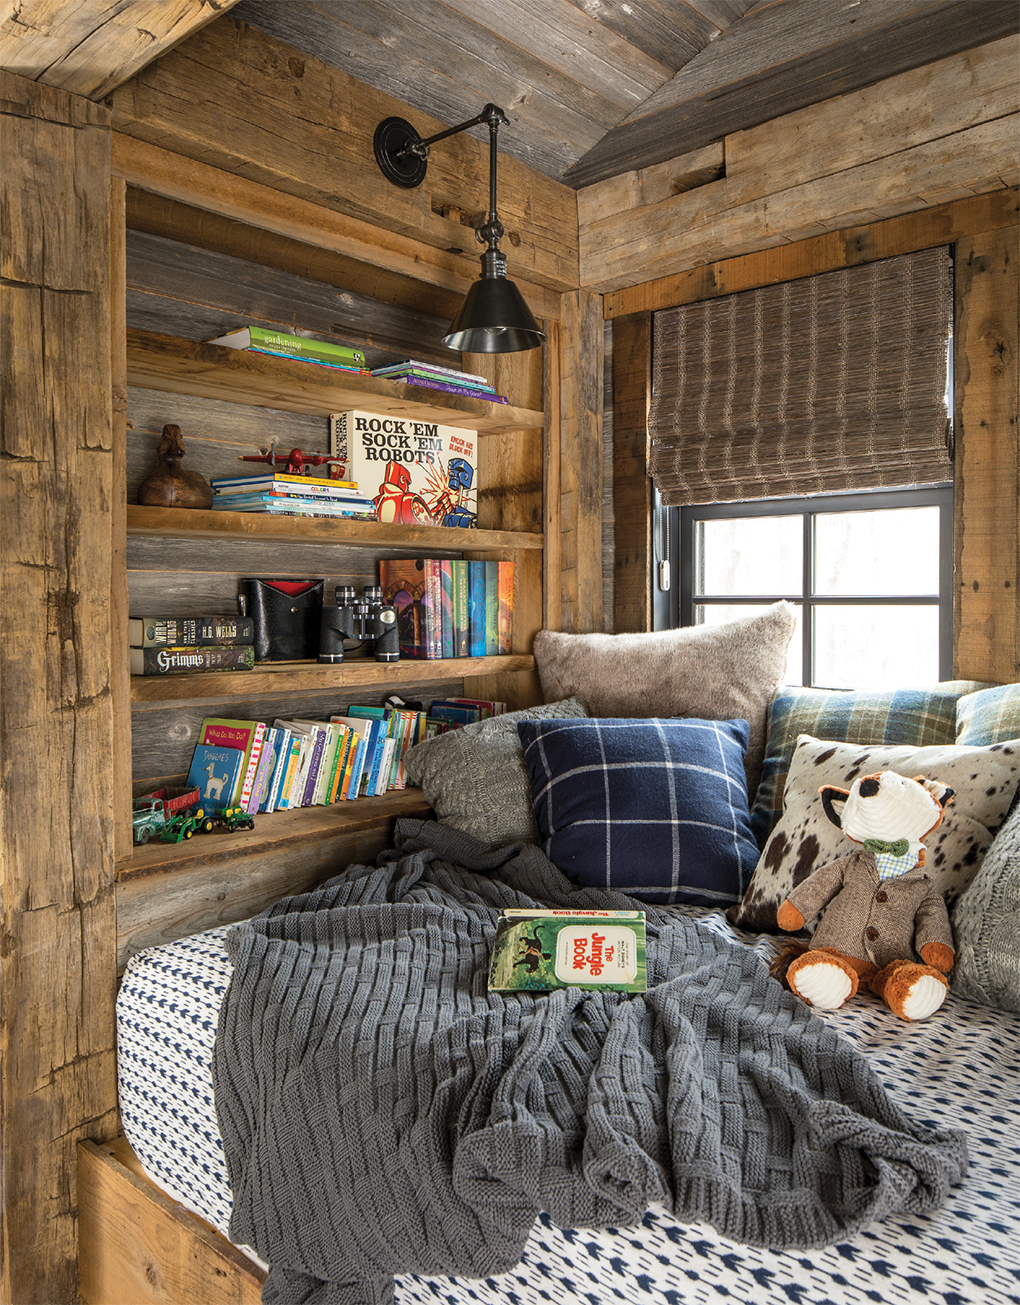 This nook is a snug hideaway for reading or napping.